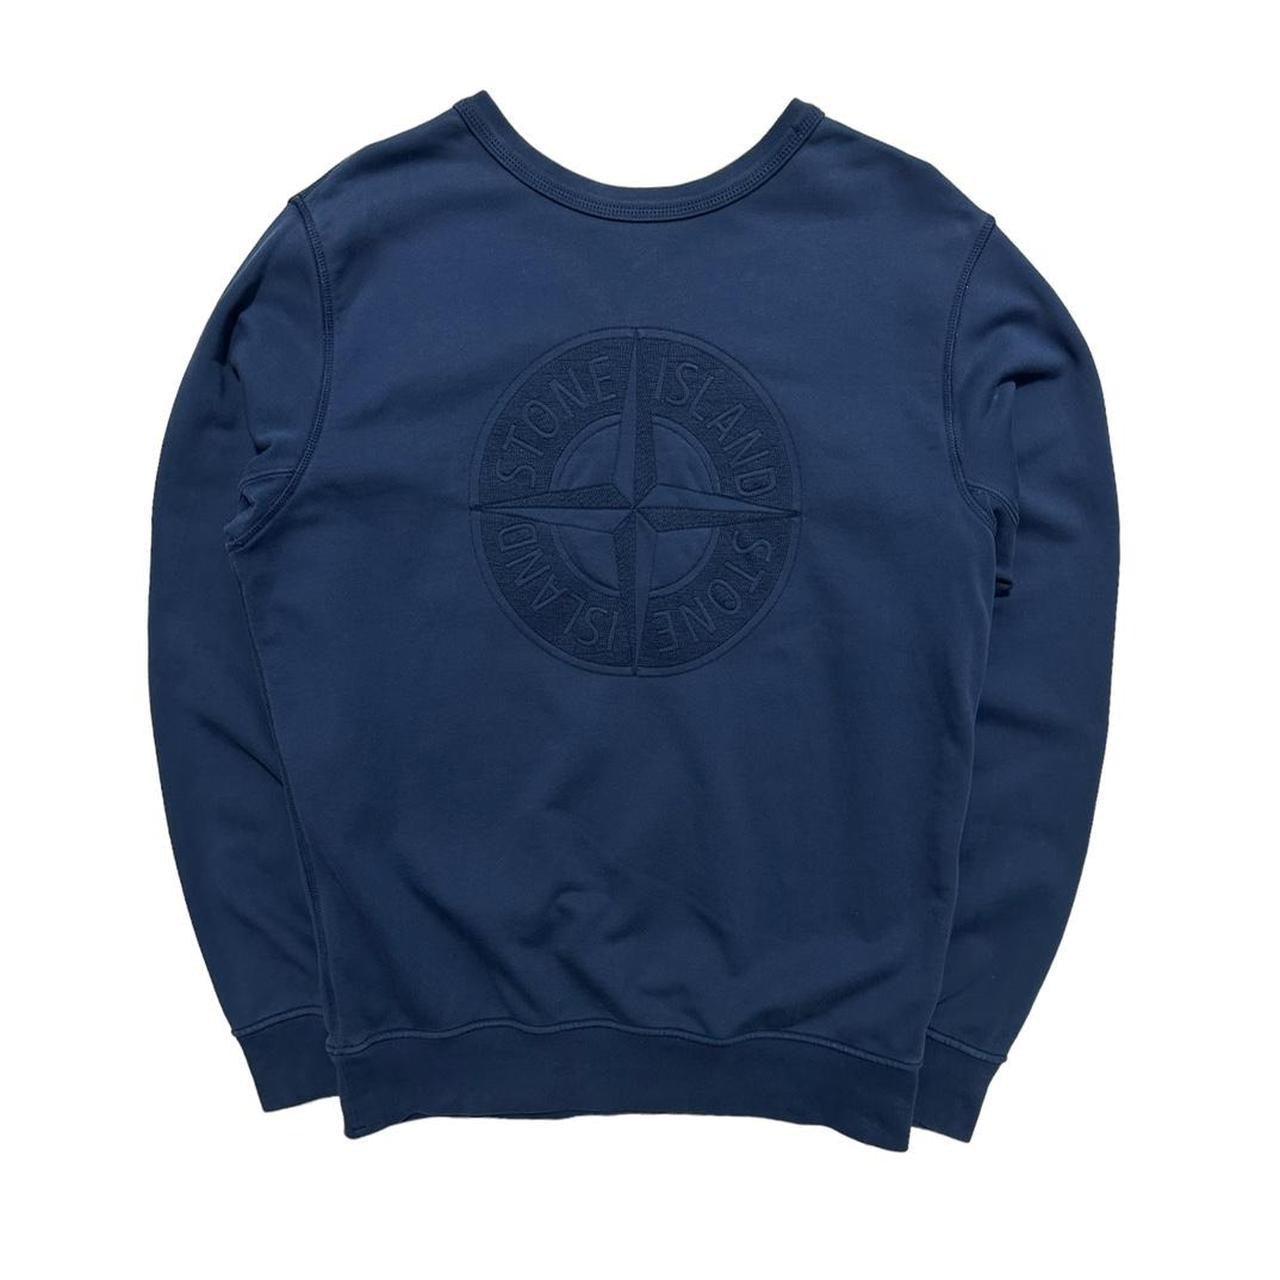 Stone Island Front Logo Double Sided Crewneck - Known Source